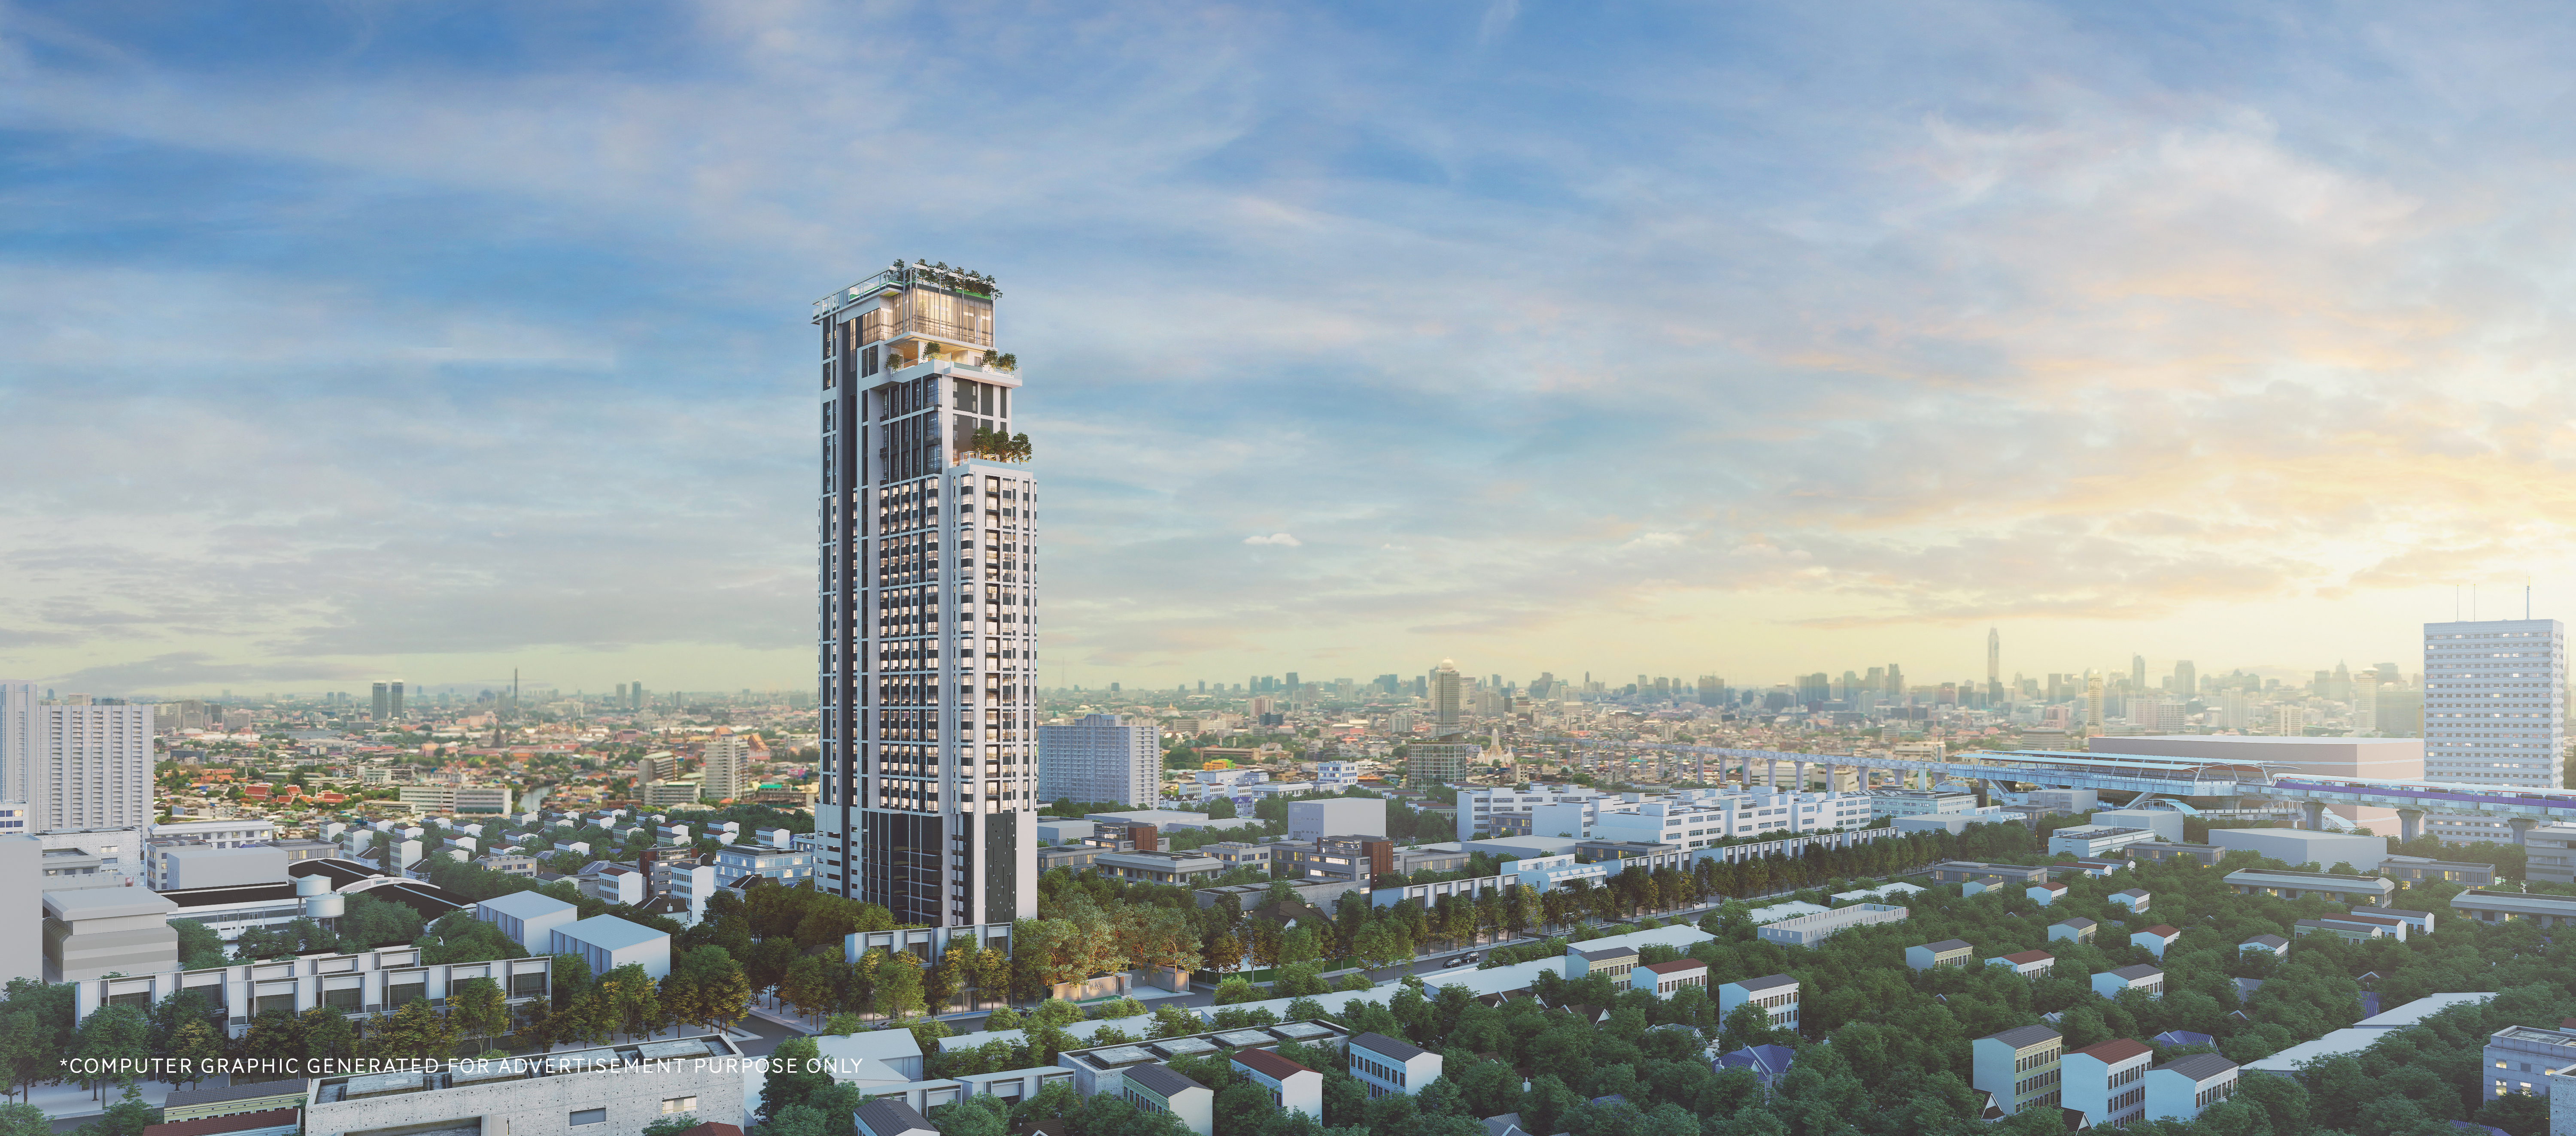 Maru Ekkamai 2 By Major Development - 450 meters From Ekkamai BTS | Property Review | InvestBangkokProperty.com | Prices From 6.8MB | Freehold | New Launch | By Major Development